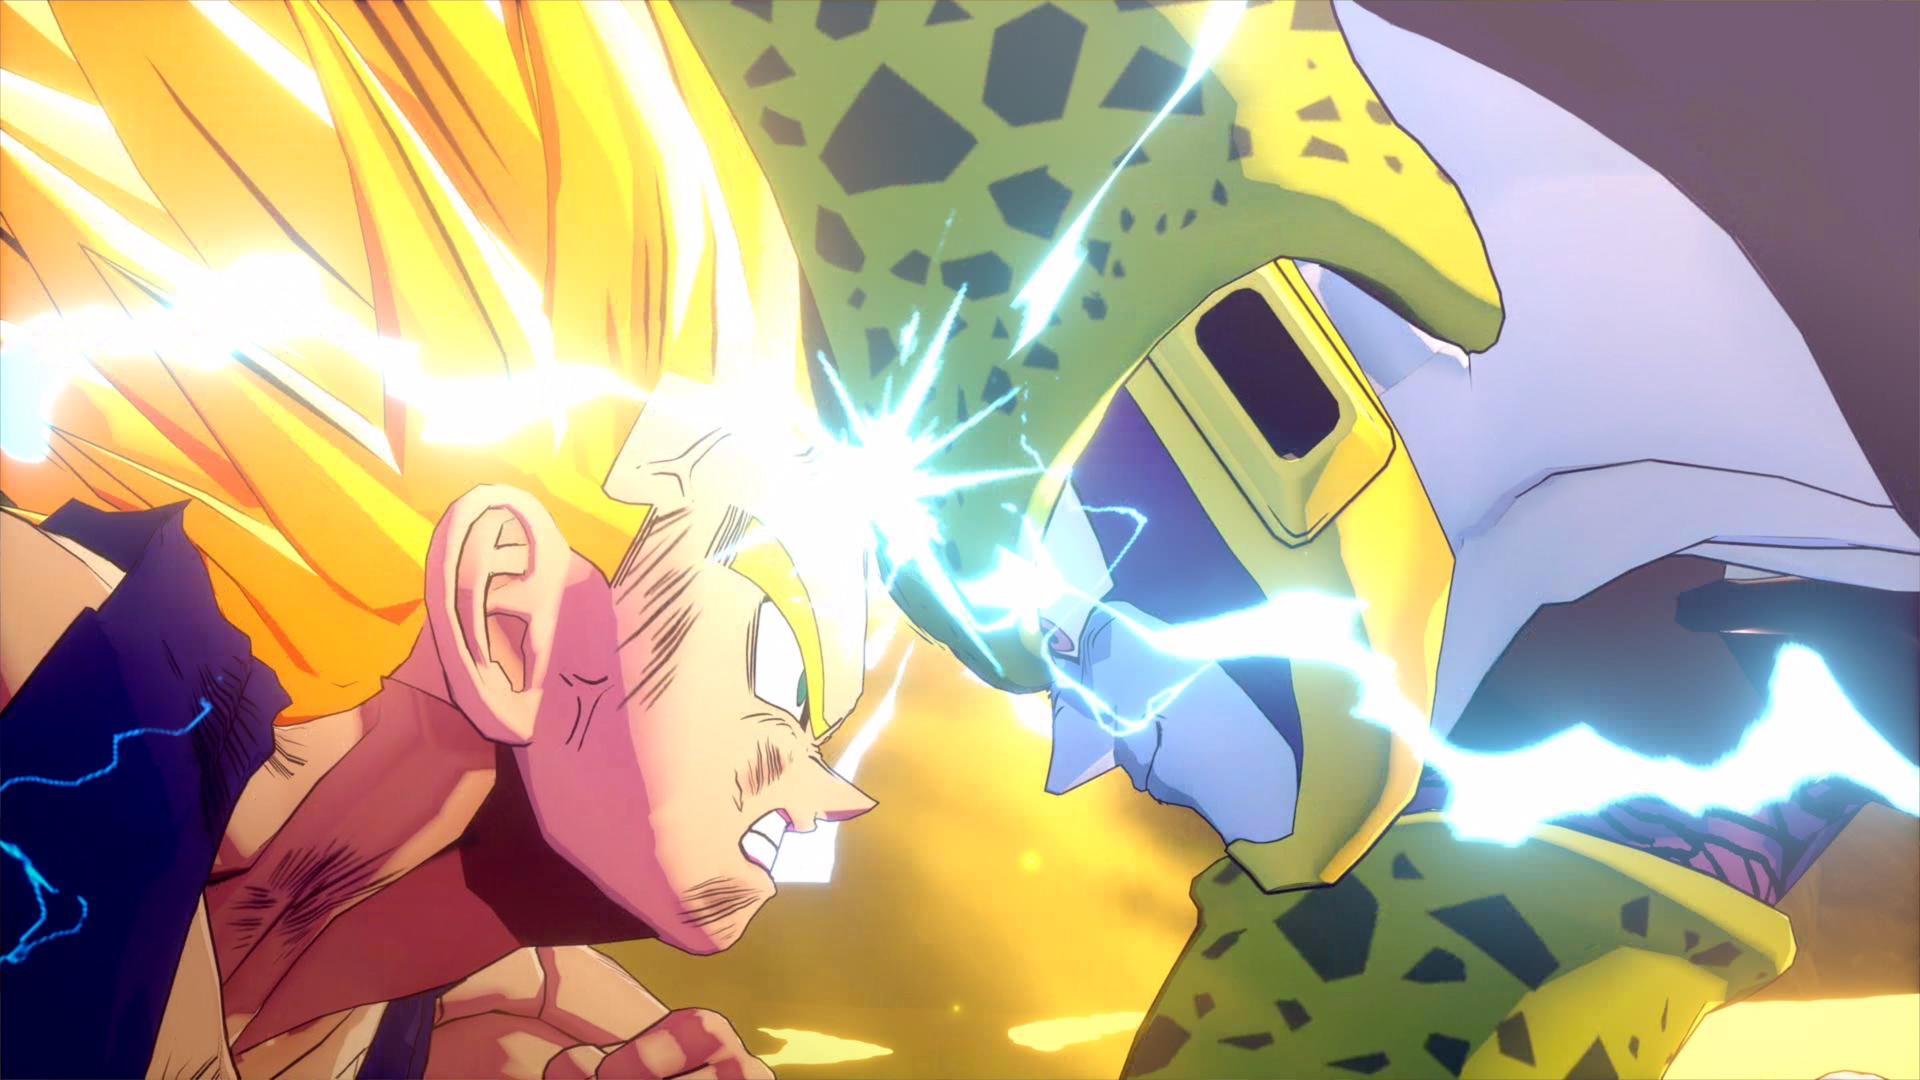 Dragon Ball Z: Kakarot gets confirmed Xbox One, PS4 and PC release date